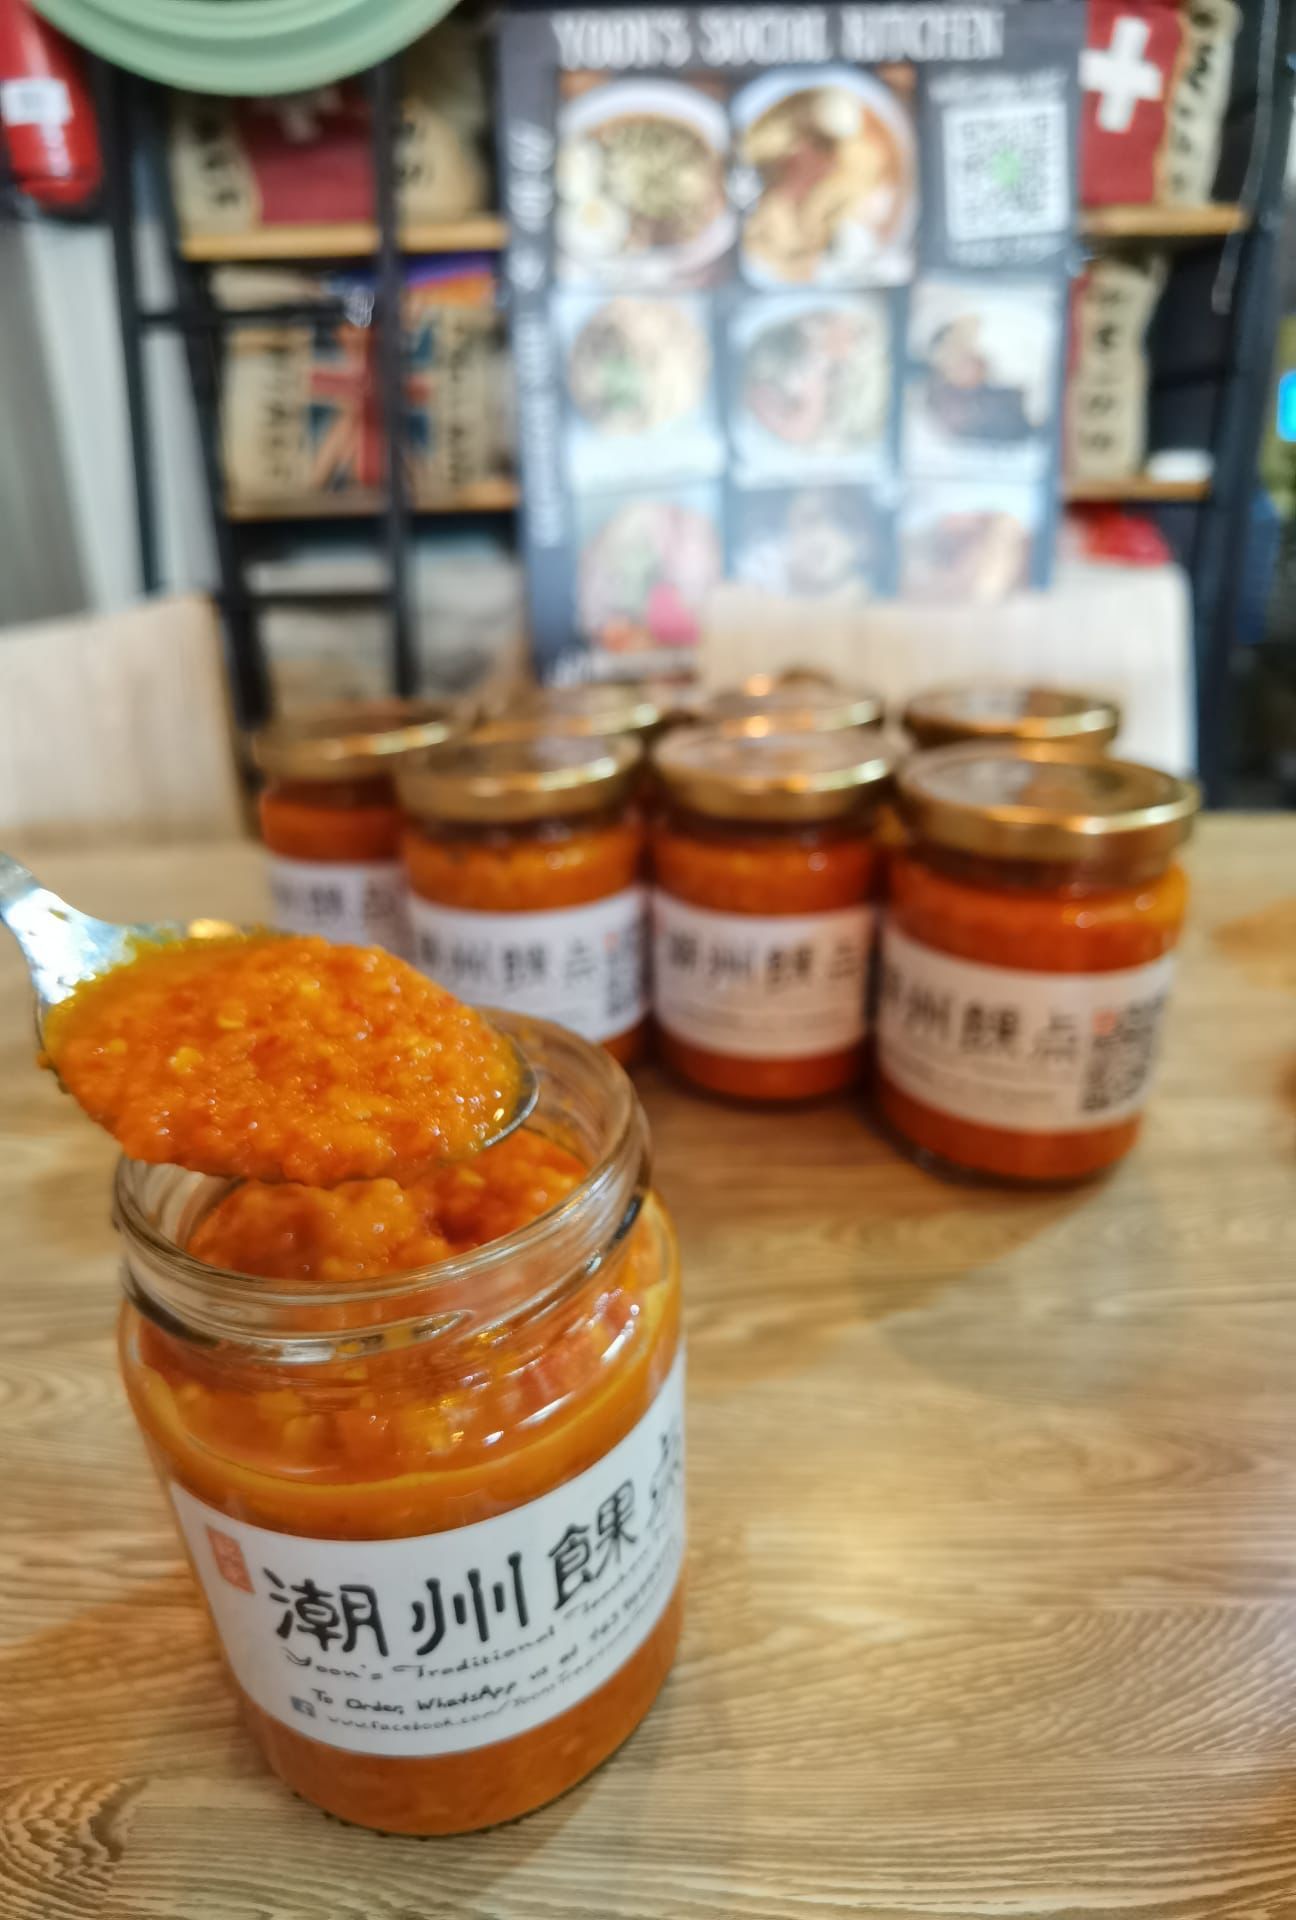 Yoon's House-Blended Chilli